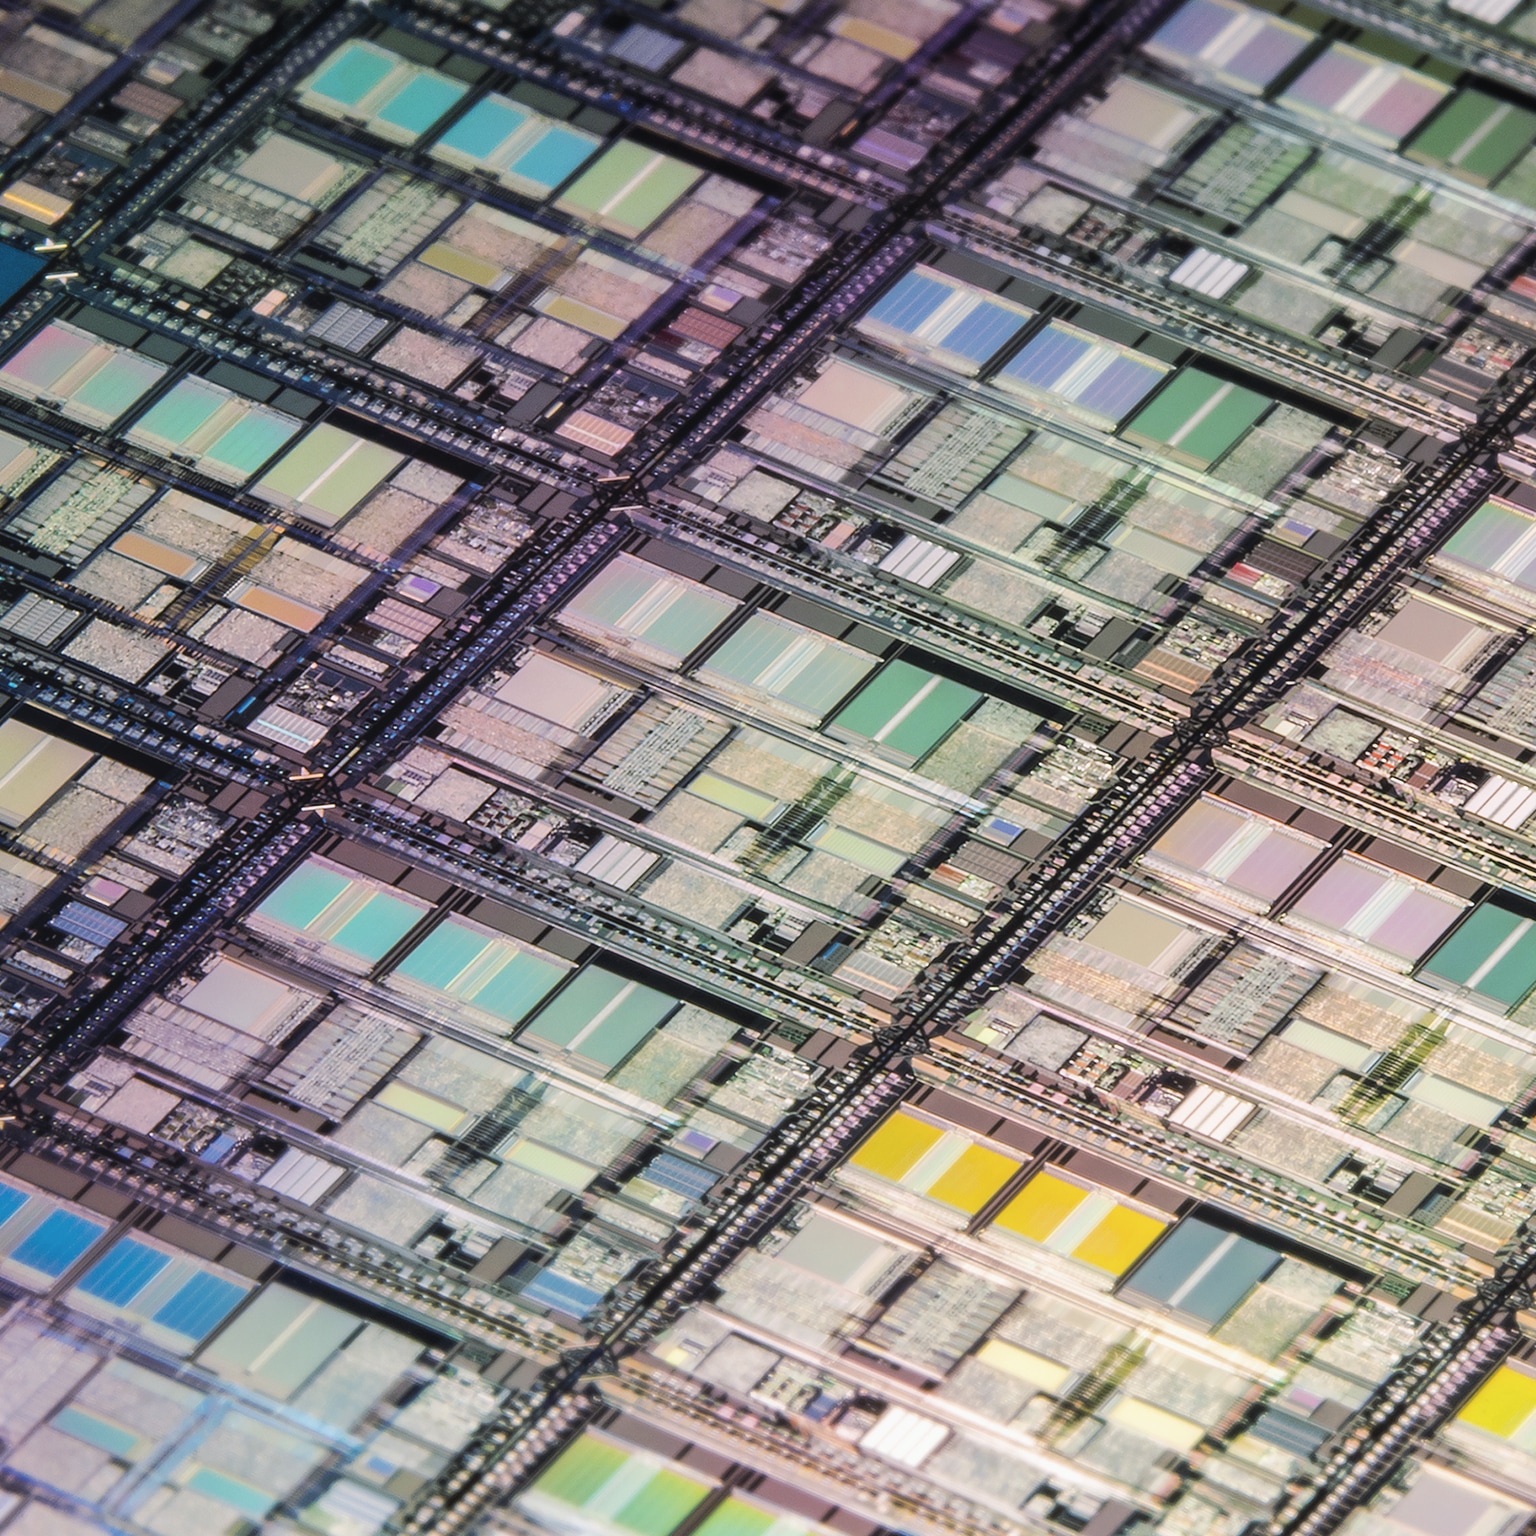 The semiconductor ten years: A trillion-dollar industry